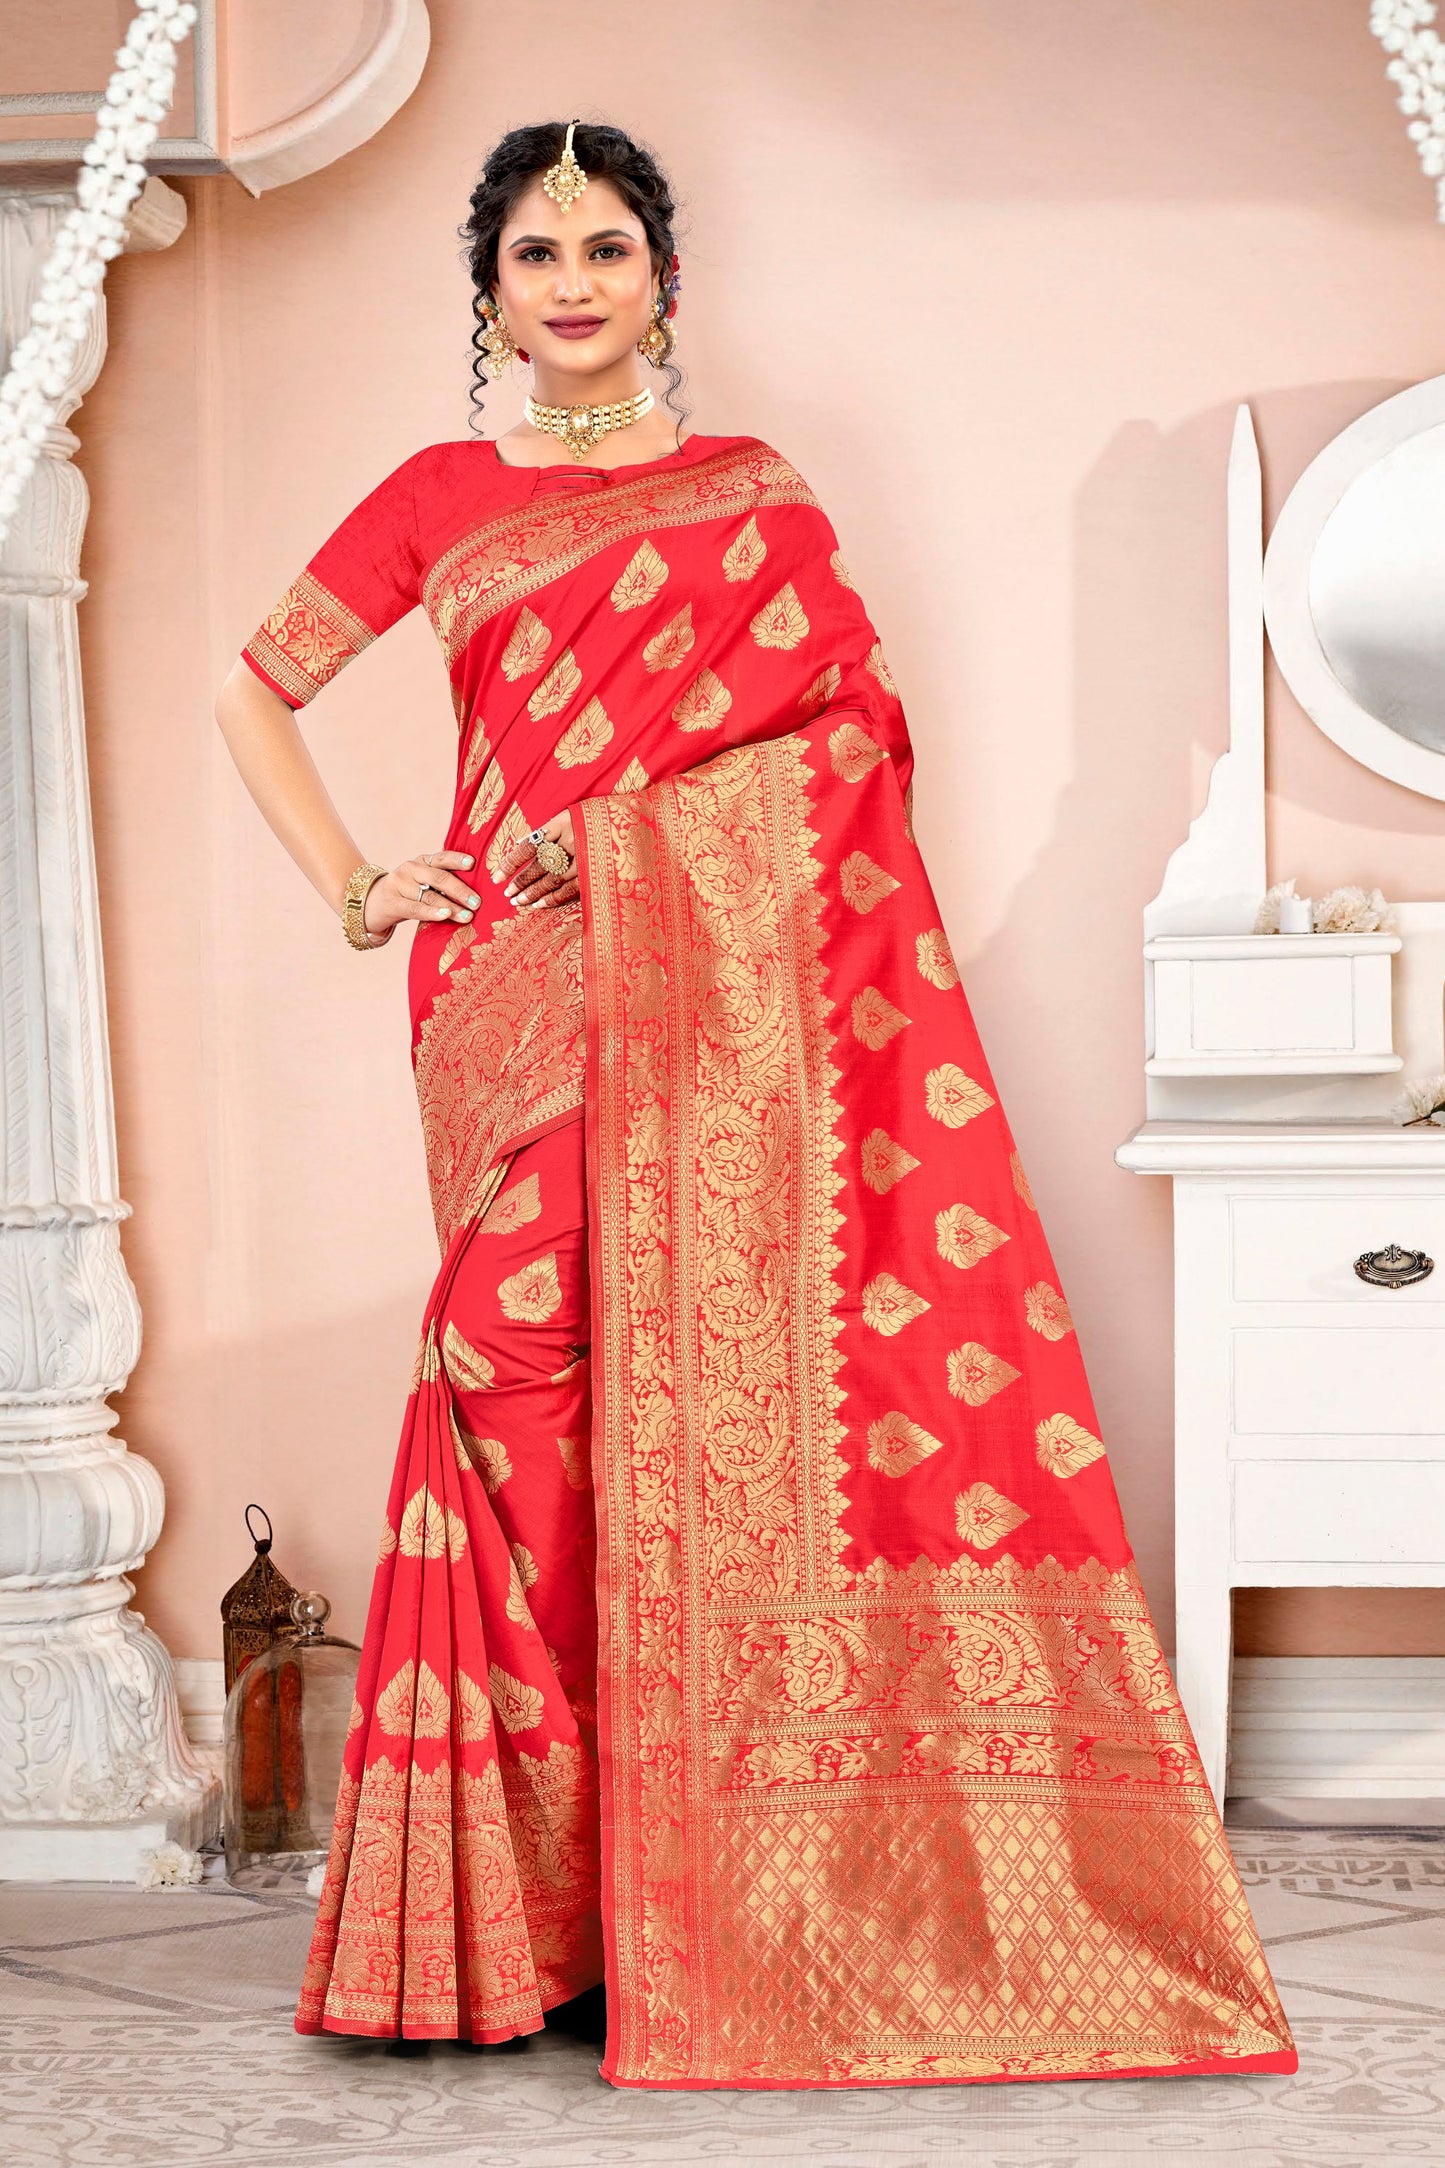 GORGEOUS PURE WEAVING BANARSI SILK SAREE IN RED FOR ALL FESTIVALS